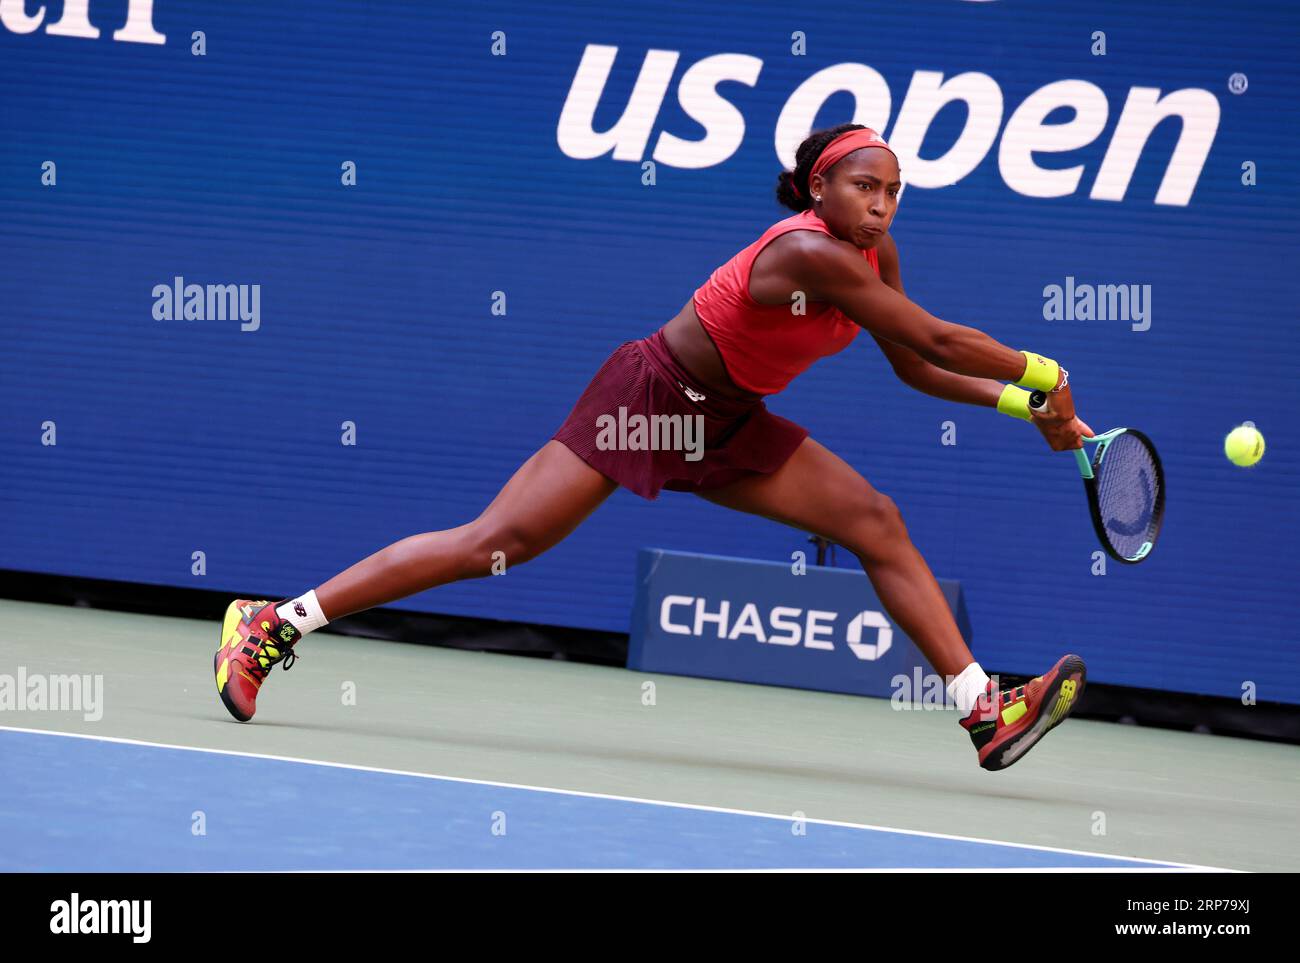 New York, United States. 03rd Sep, 2023. Number 6 seed Coco Gauff of the United States chases down a shot to Caroline Wozniakci of Denmark during their fourth round match at the US Open. Photography by Credit: Adam Stoltman/Alamy Live News Stock Photo